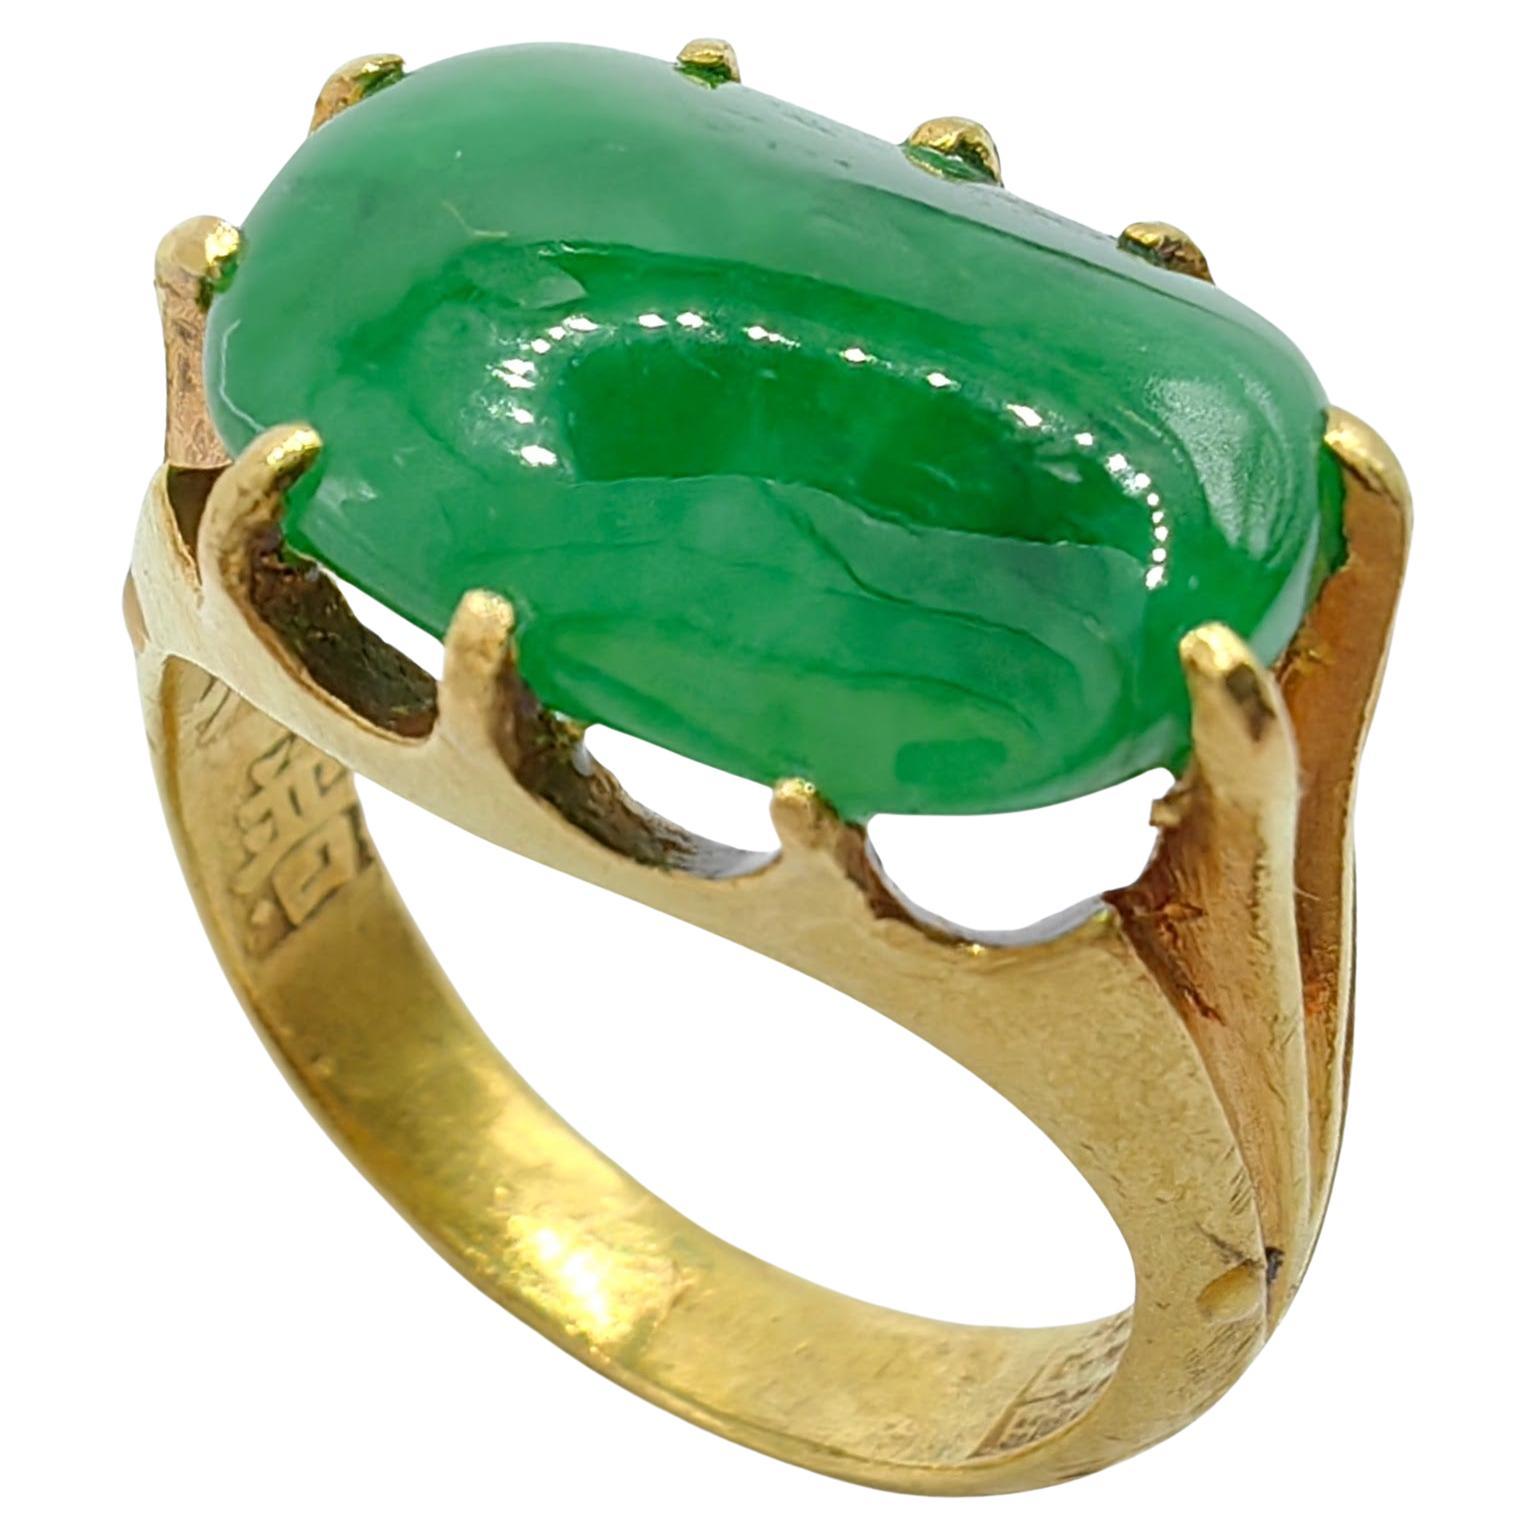 Antique Imperial Green Cabochon Jadeite Jade 24K Yellow Gold Pinky Finger Ring For Sale